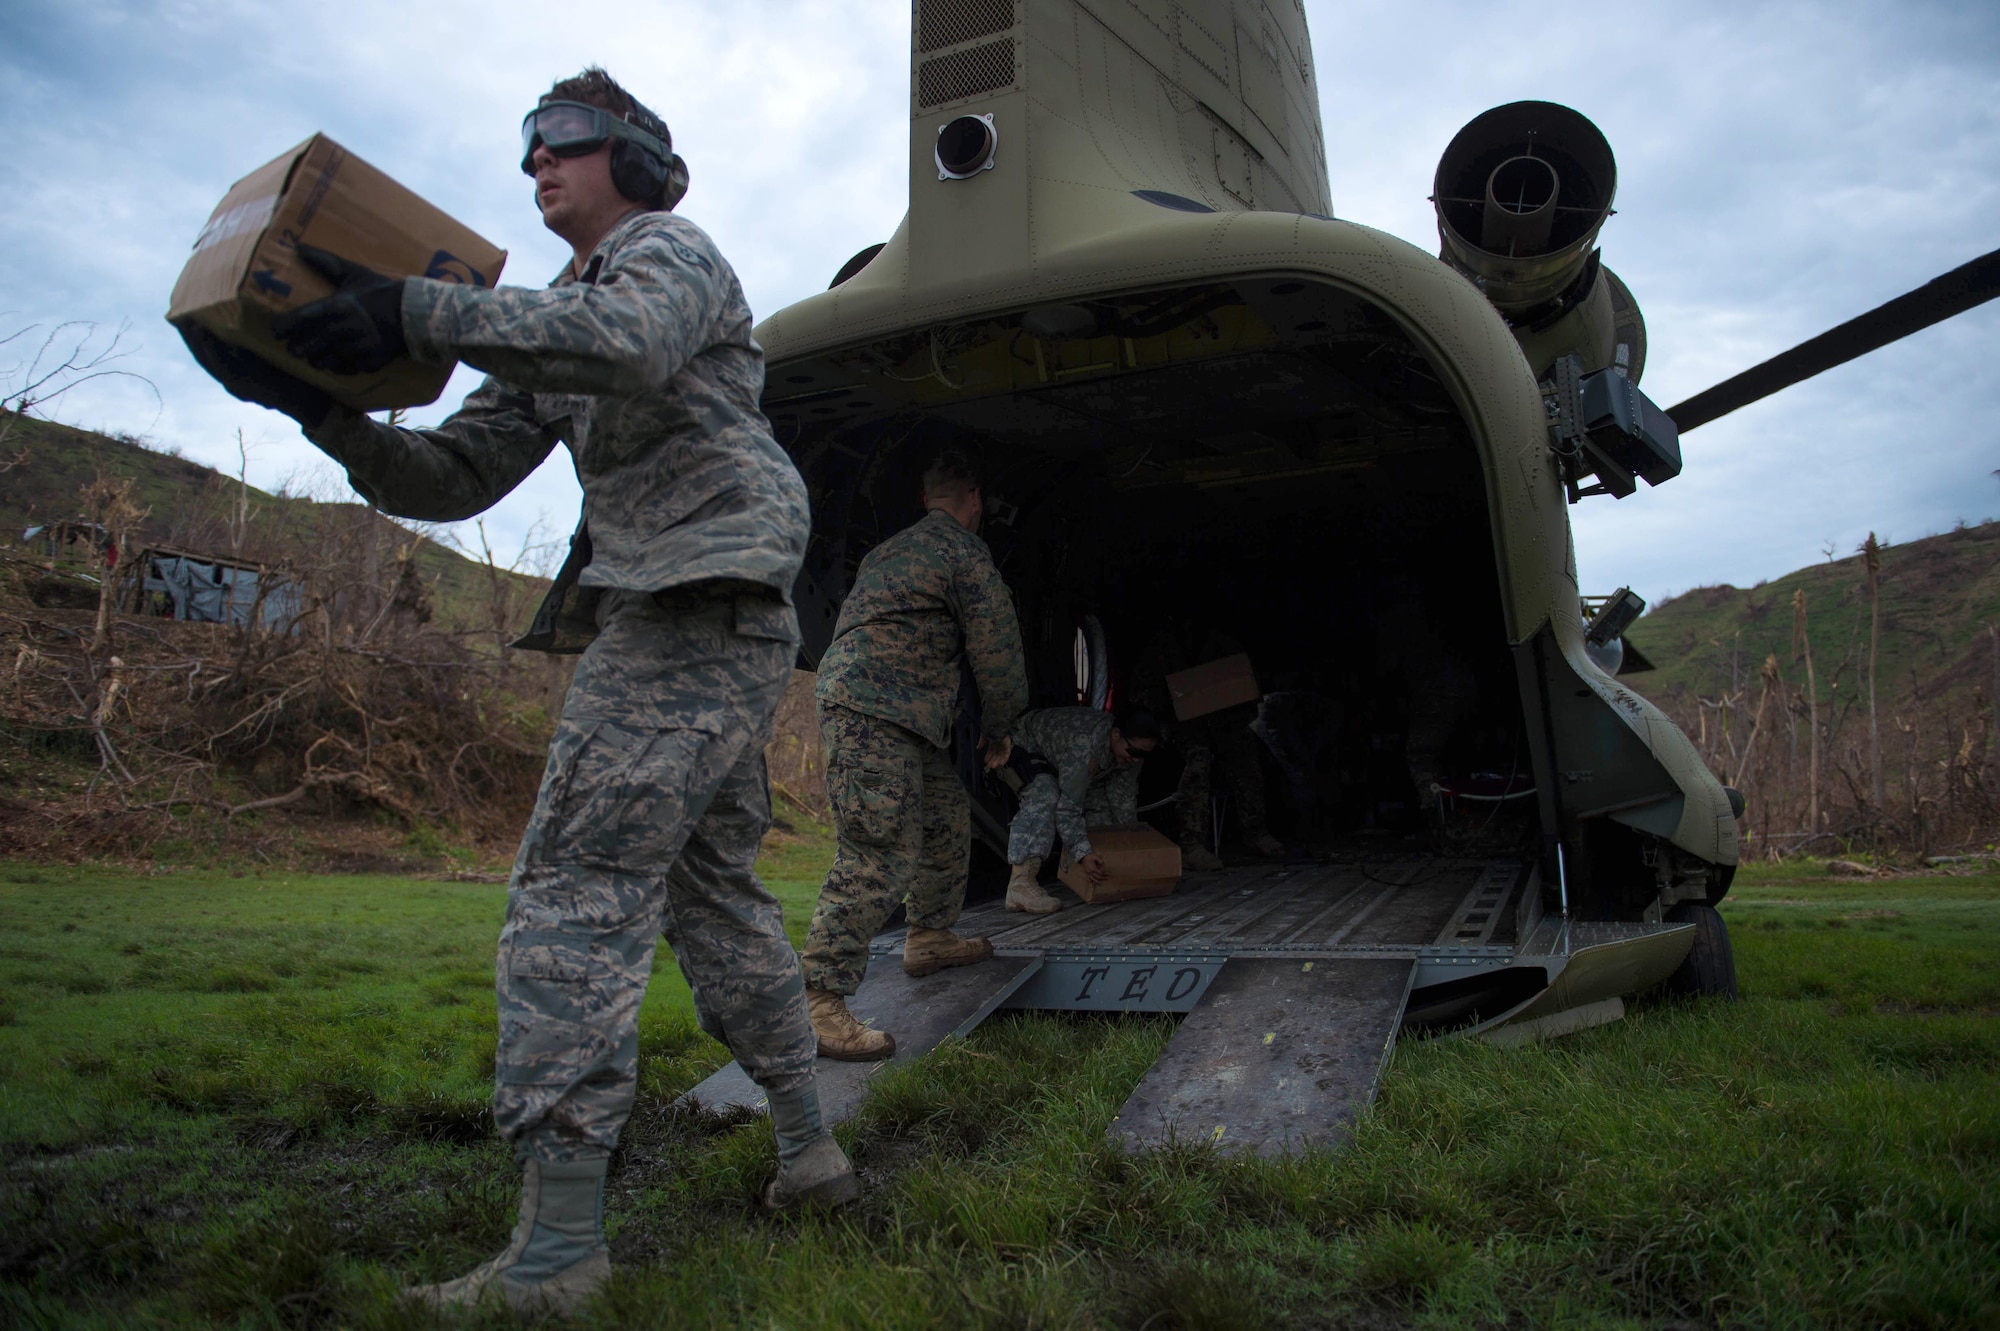 Airman 1st Class James Raynor, a 621st Contingency Response Wing air transportation apprentice, pitches a box during an aid transportation mission Oct. 14, 2016 in Anse-d'Hainault, Haiti. Members of Joint Task Force Matthew have been working to provide and bring aid to those in need in Haiti following the aftermath of Hurricane Matthew.  (U.S. Air Force photo/Staff Sgt. Paul Labbe)